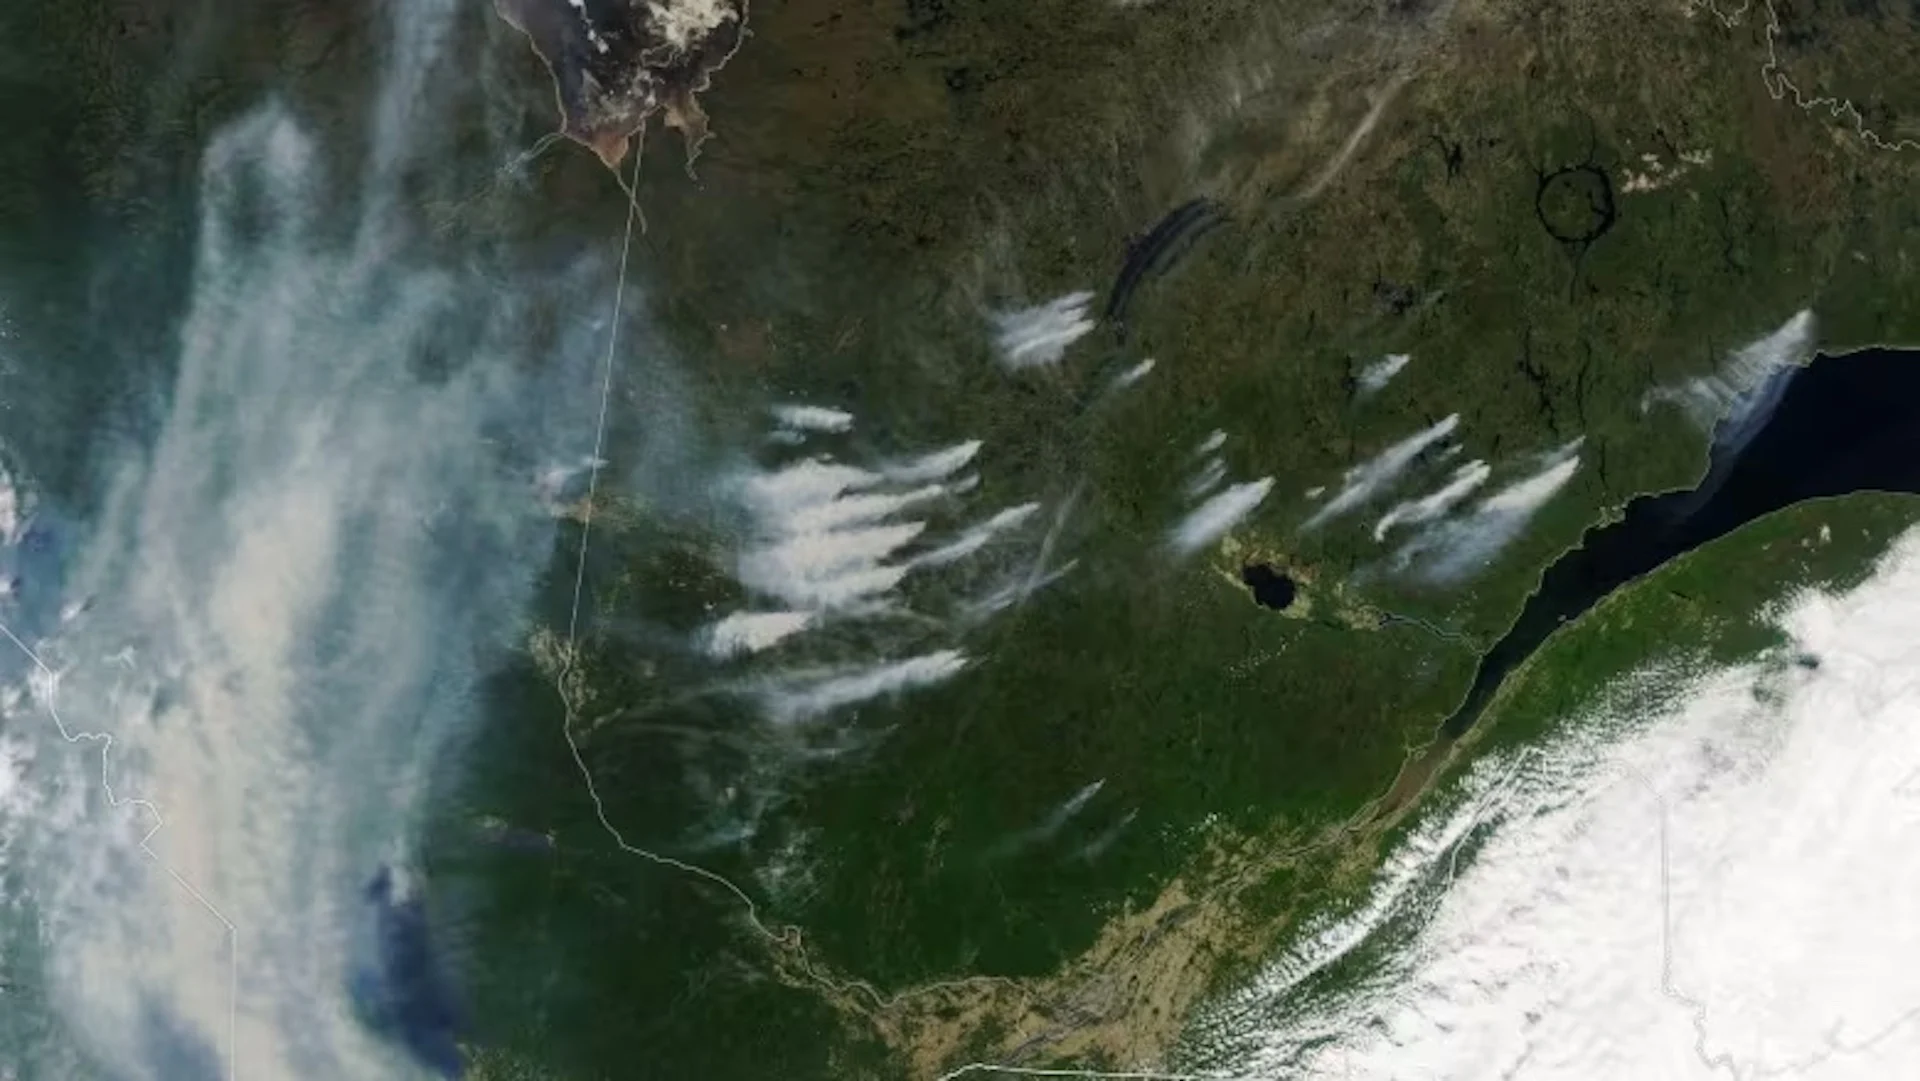 Lightning-caused wildfires burn the most area in Canada, and that may increase as a result of a warming climate